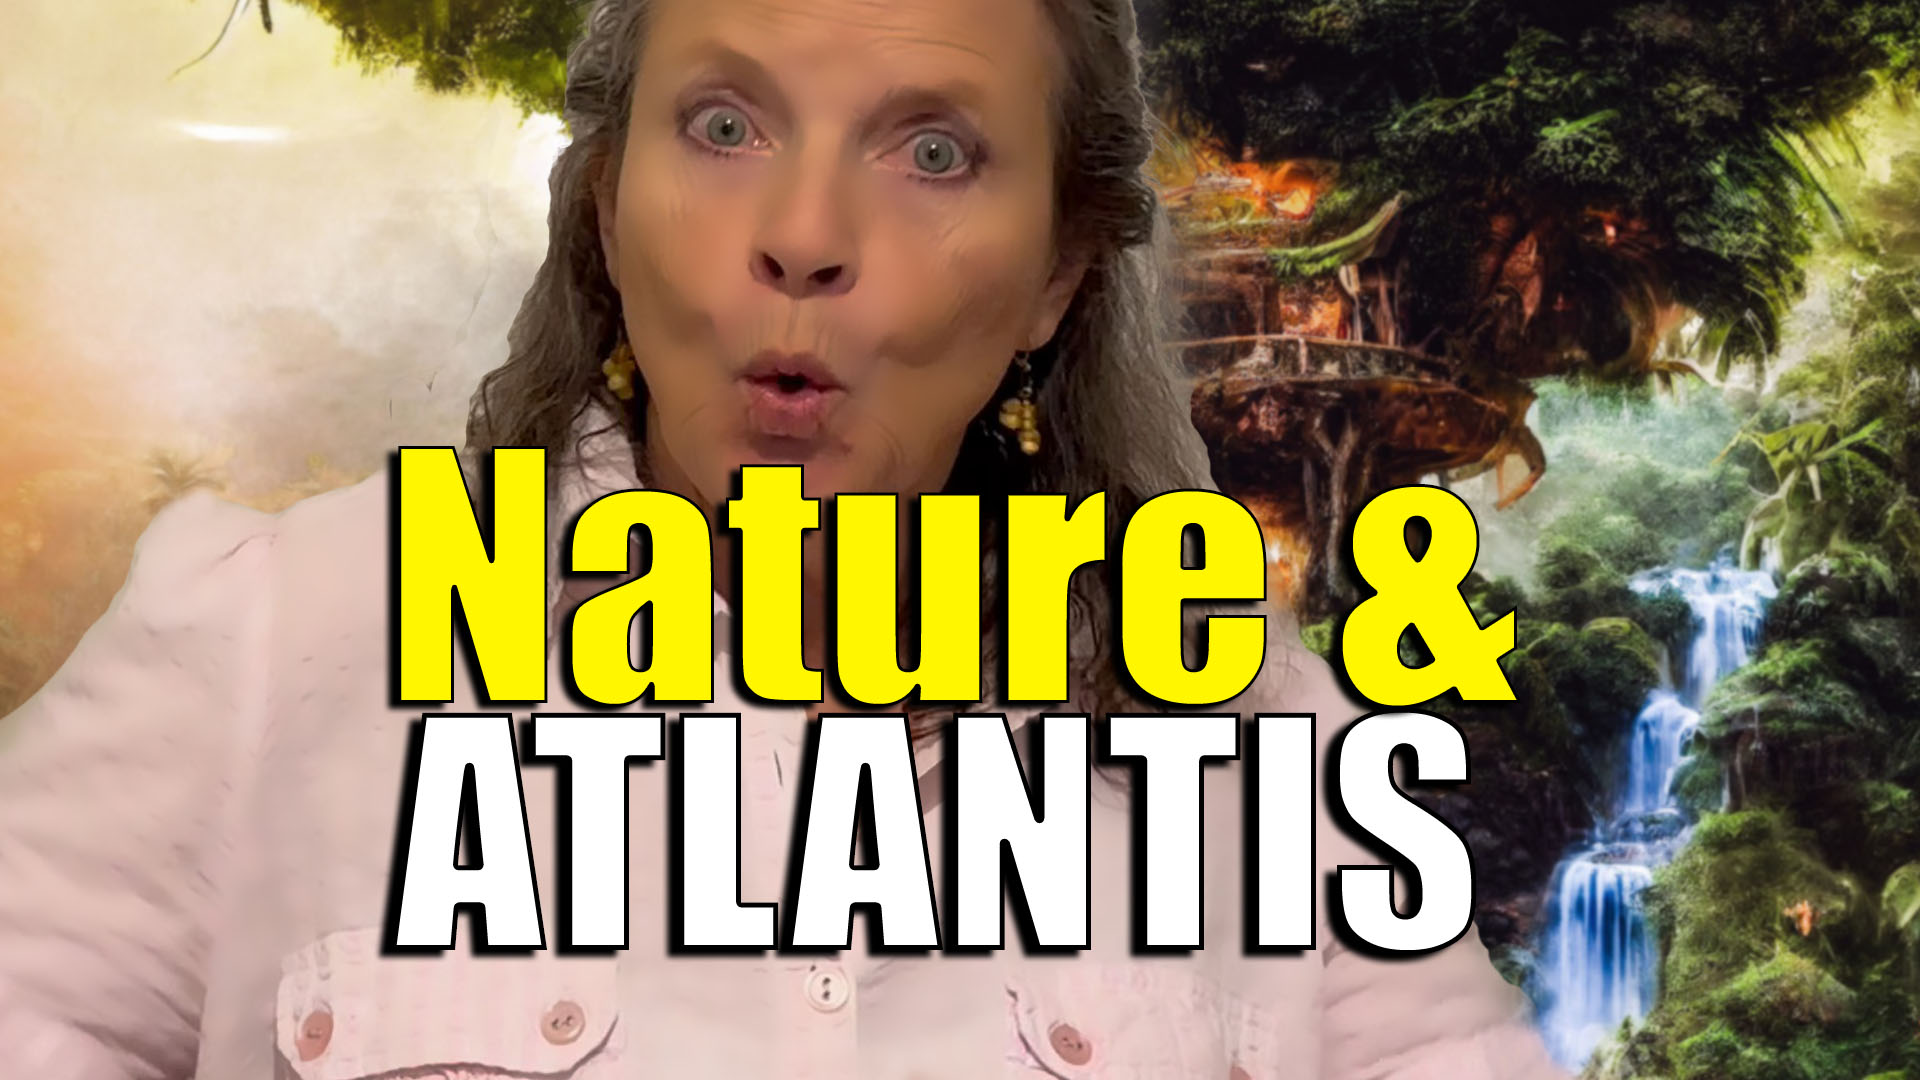 the agreement with nature in Atlantis